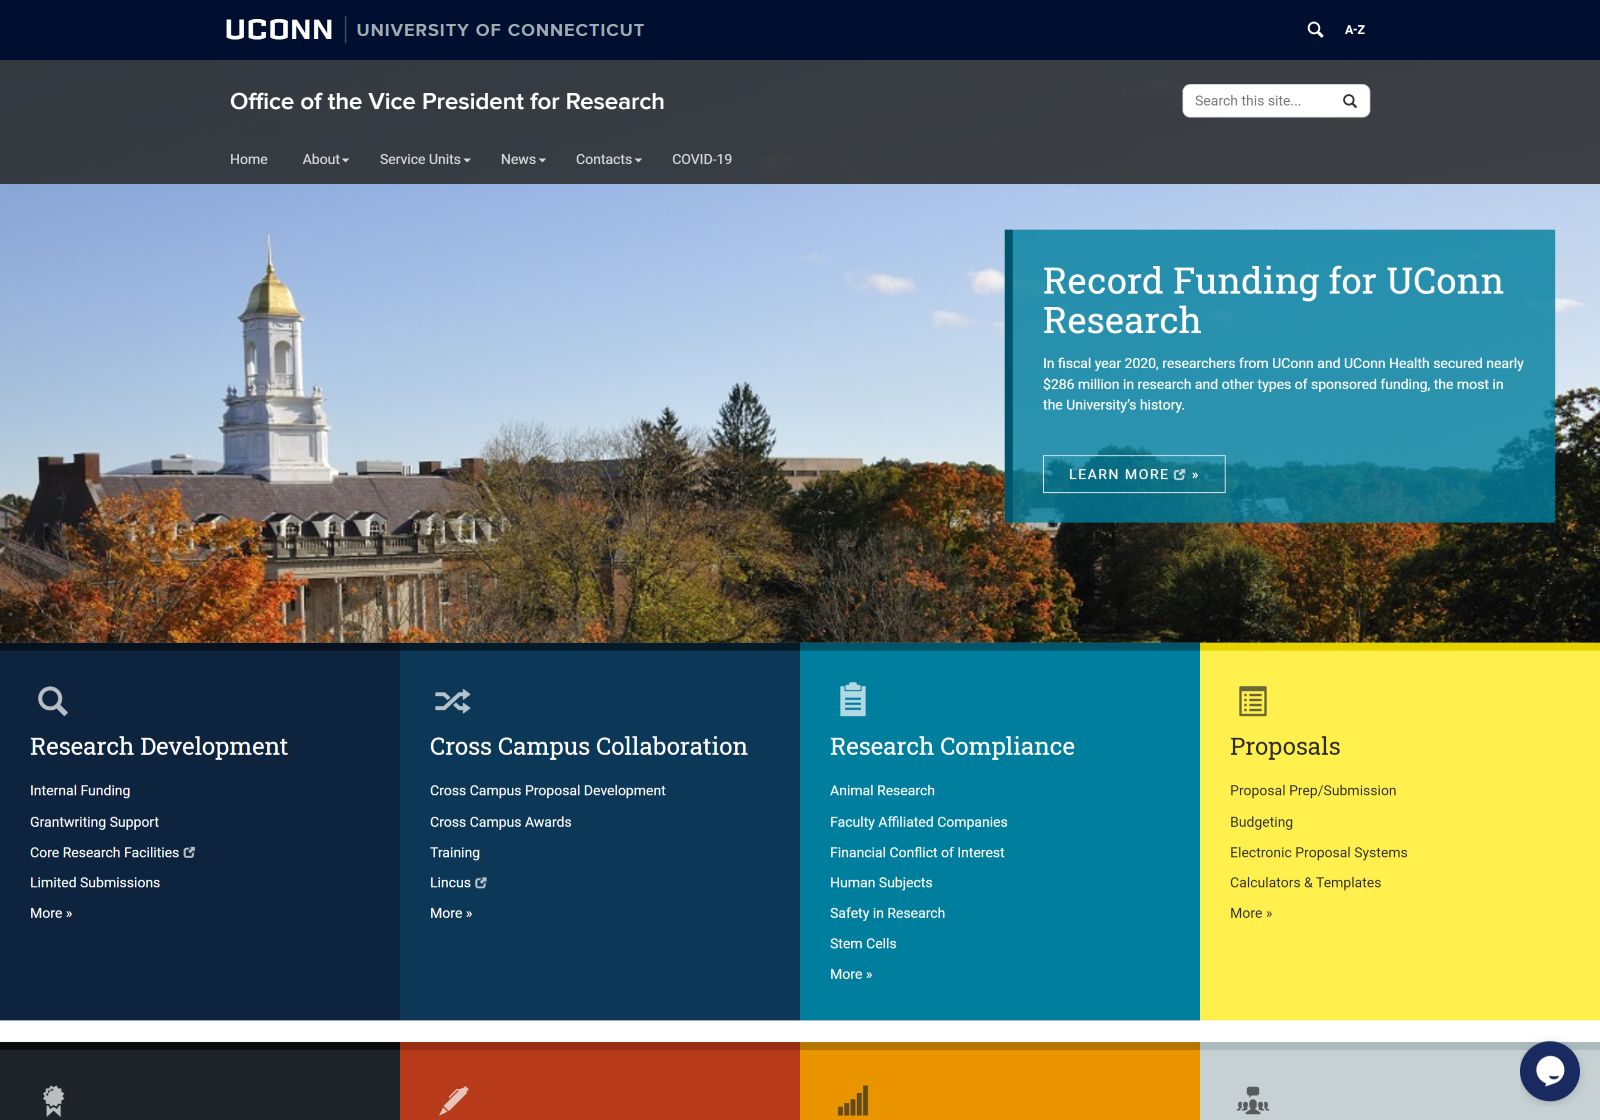 Desktop view of the Office of the Vice President for Research website